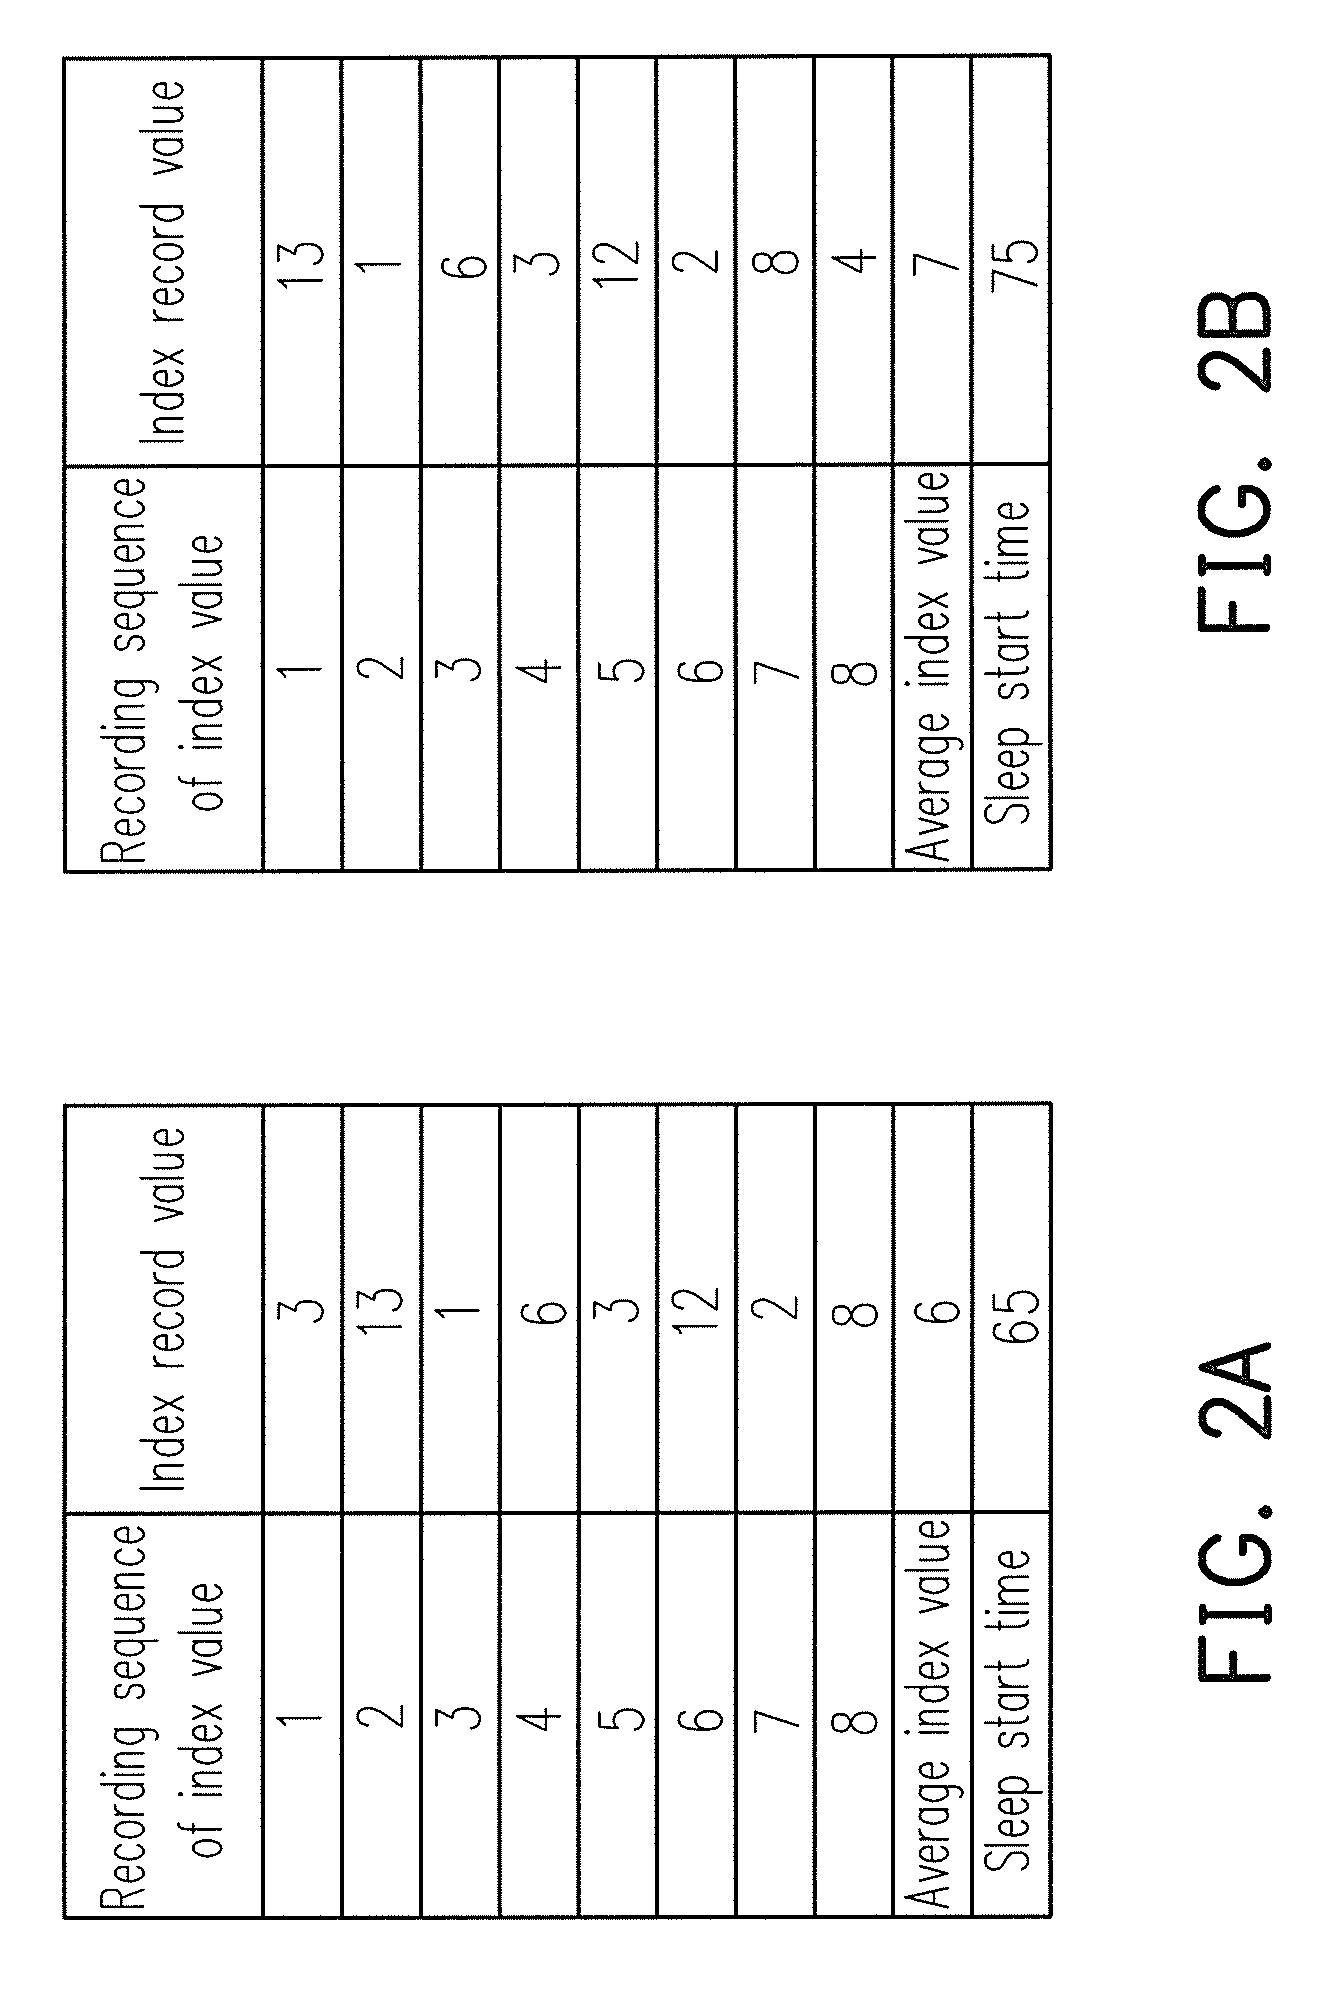 Power management method for input device